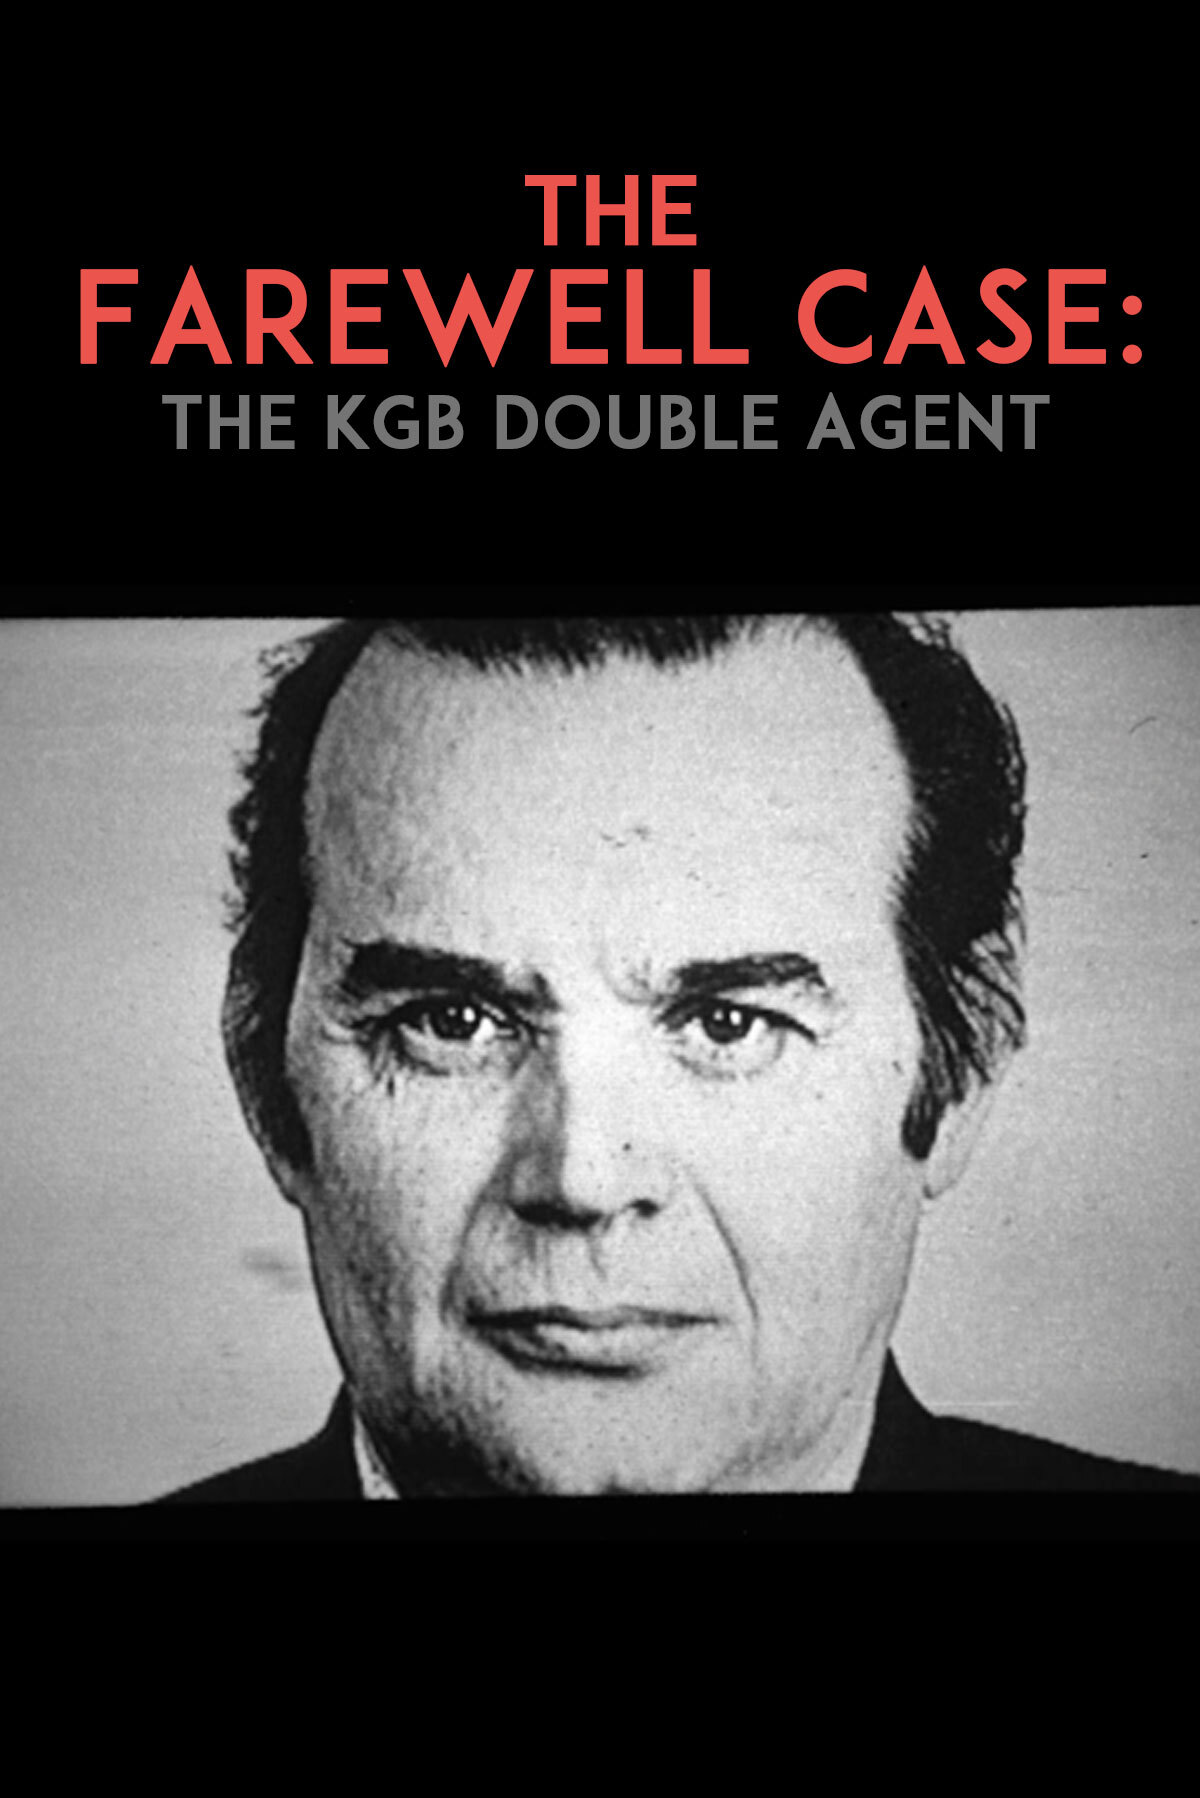 The Farewell Case: The KGB Double Agent